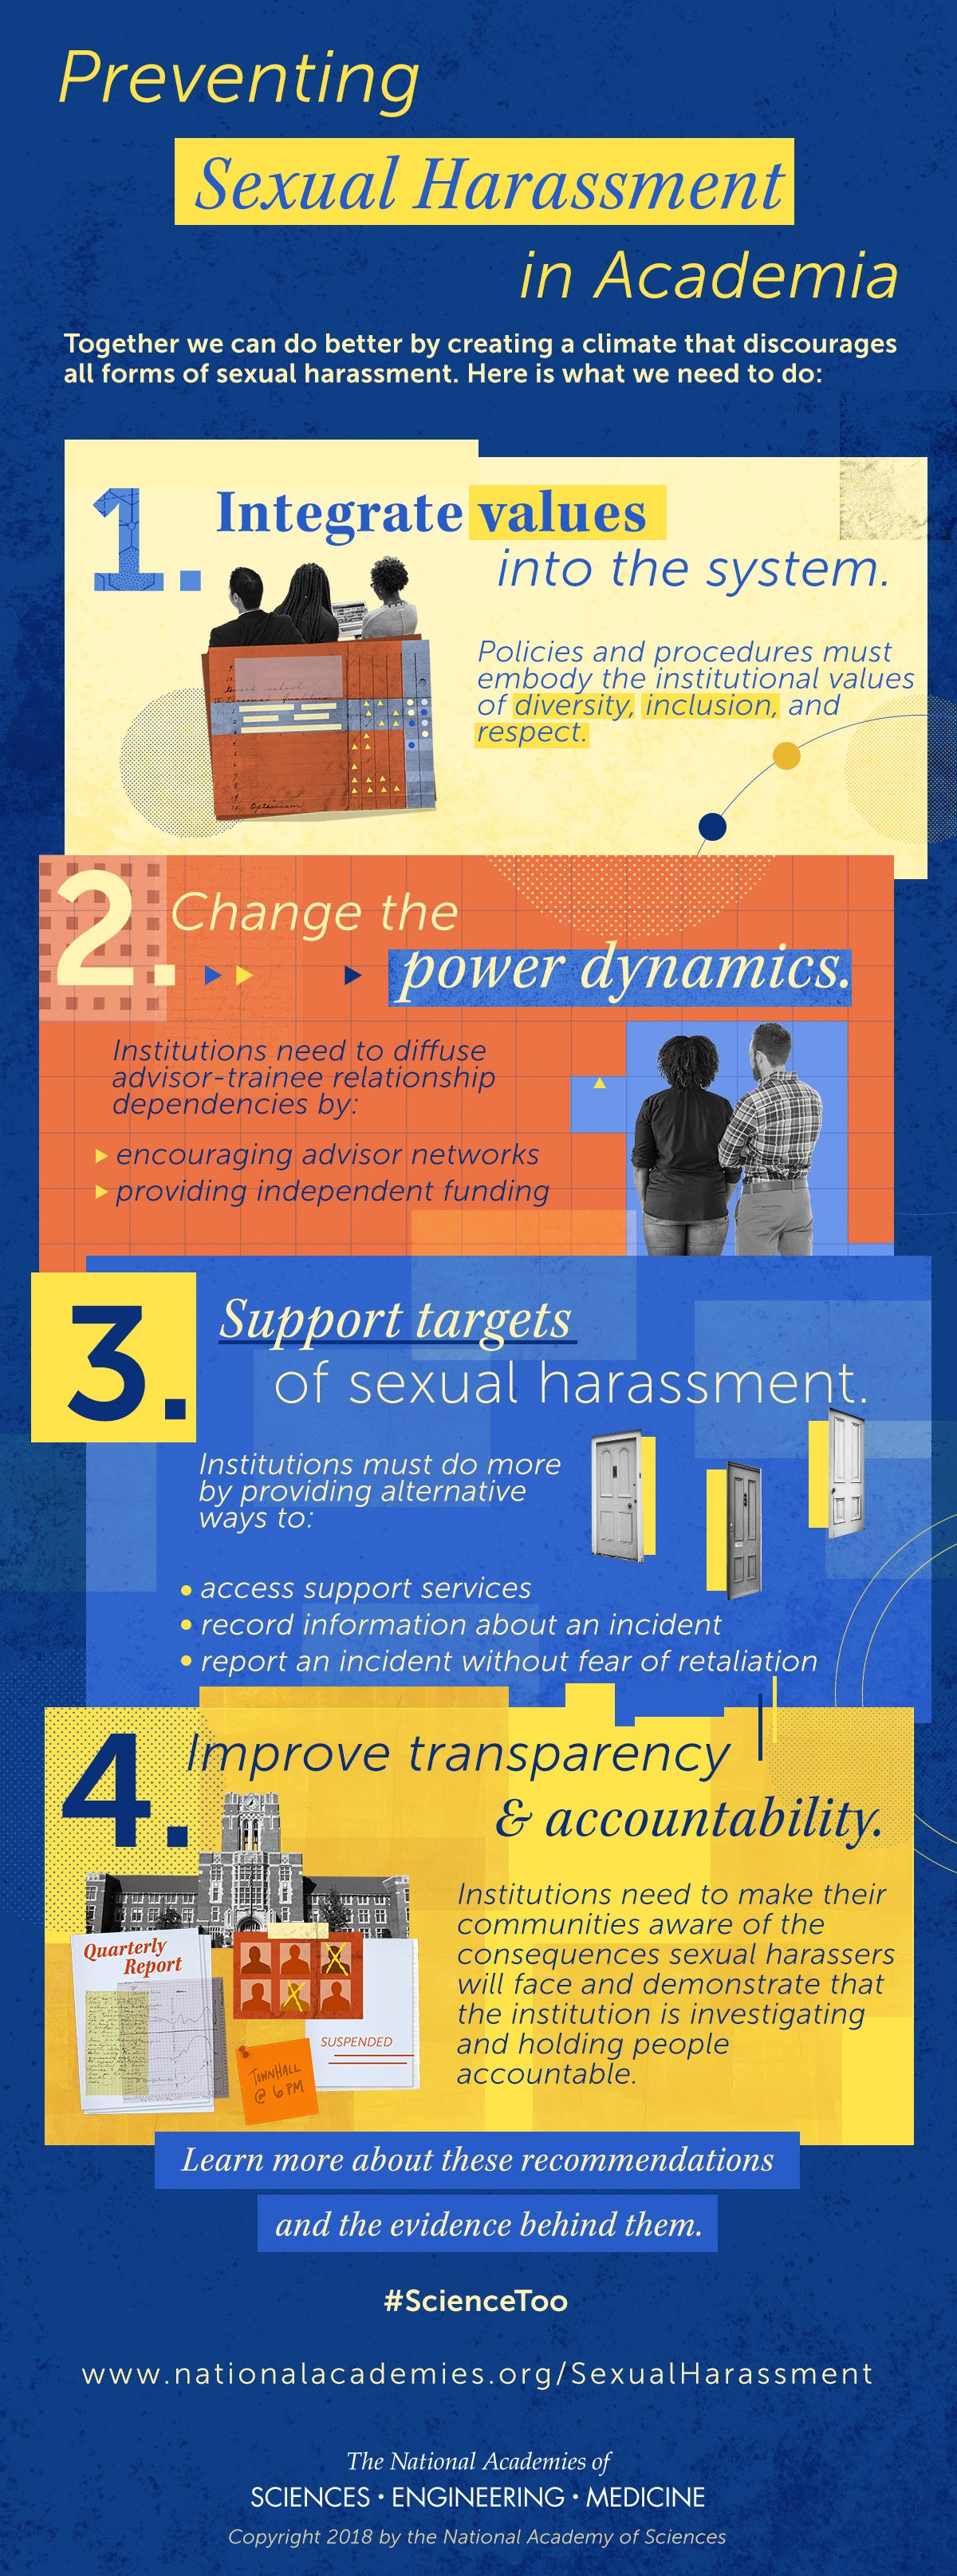 Preventing Sexual Harassment in Academia: Together we can do better by creating a climate that discourages all forms of sexual harassment. Here is what we need to do: 1. Integrate values into the system. Policies and procedures must embody the institutional values of diversity, inclusion and respect. 2. Change the power dynamics. Institutions need to diffuse adviser-trainee relationship dependencies by encouraging adviser networks and providing independent funding. 3. Support targets of sexual harassment. Institutions must do more by providing alternative ways to access support services, record information about an incident, and report an incident without fear of retaliation. 4. Improve transparency and accountability. Institutions need to make their communities aware of the consequences sexual harassers will face and demonstrate that the institution is investigating and holding people accountable. Learn more about these recommendations and the evidence behind them. #ScienceToo"